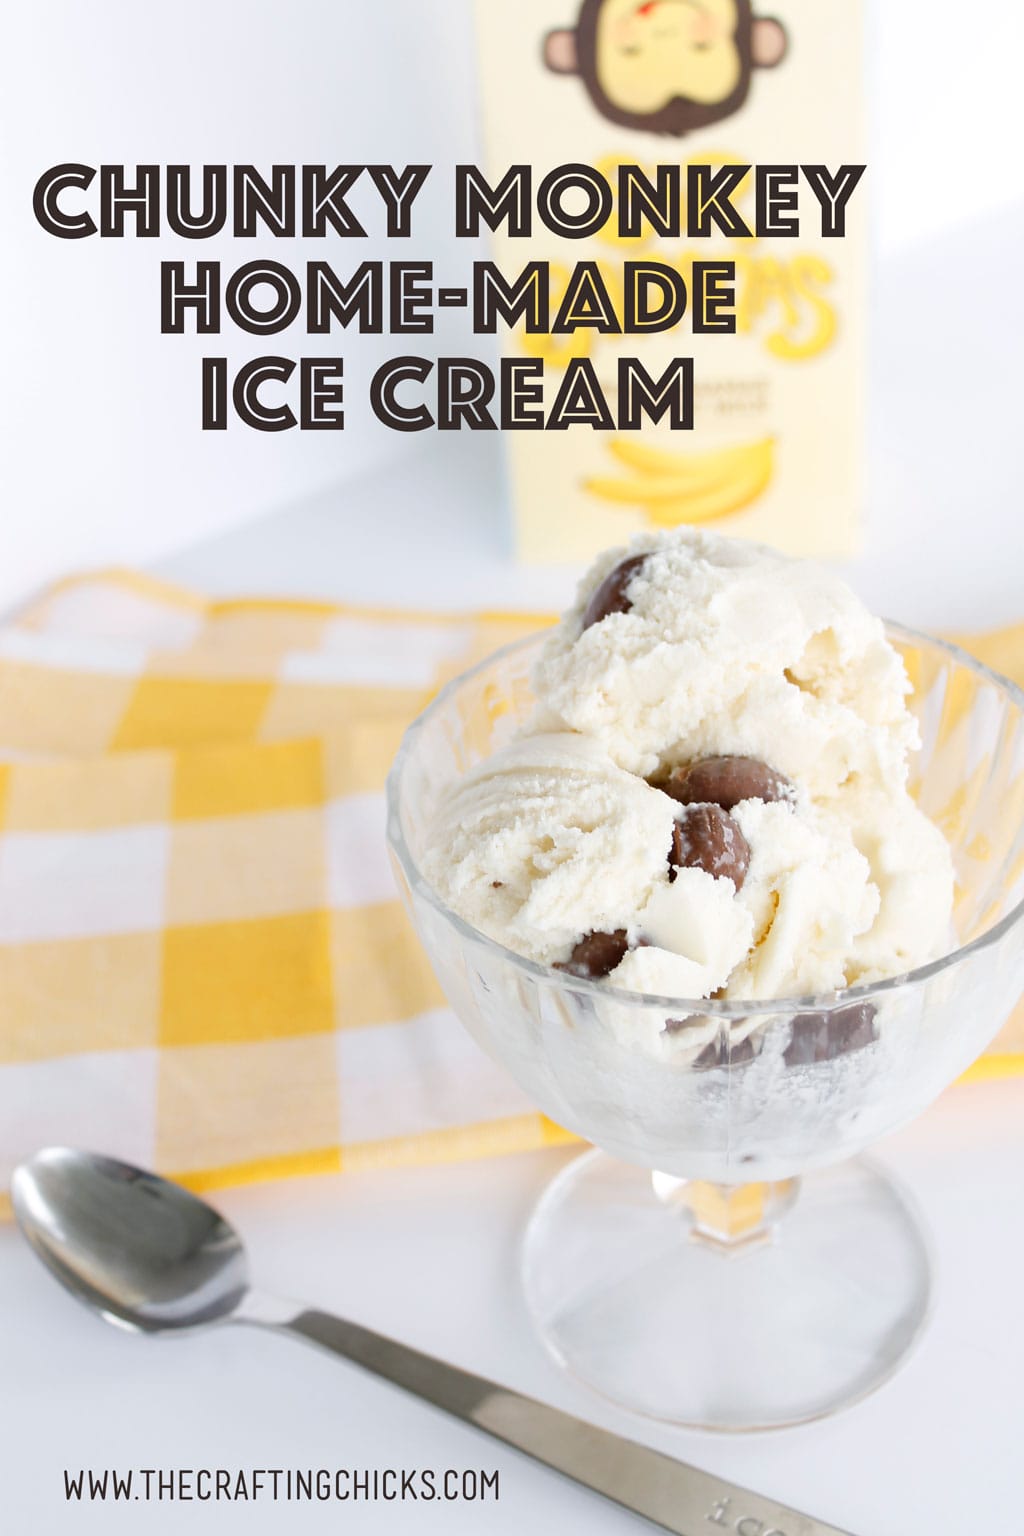 Chunky Monkey Homemade Ice Cream will be a family favorite. So easy to make and tastes delicious.